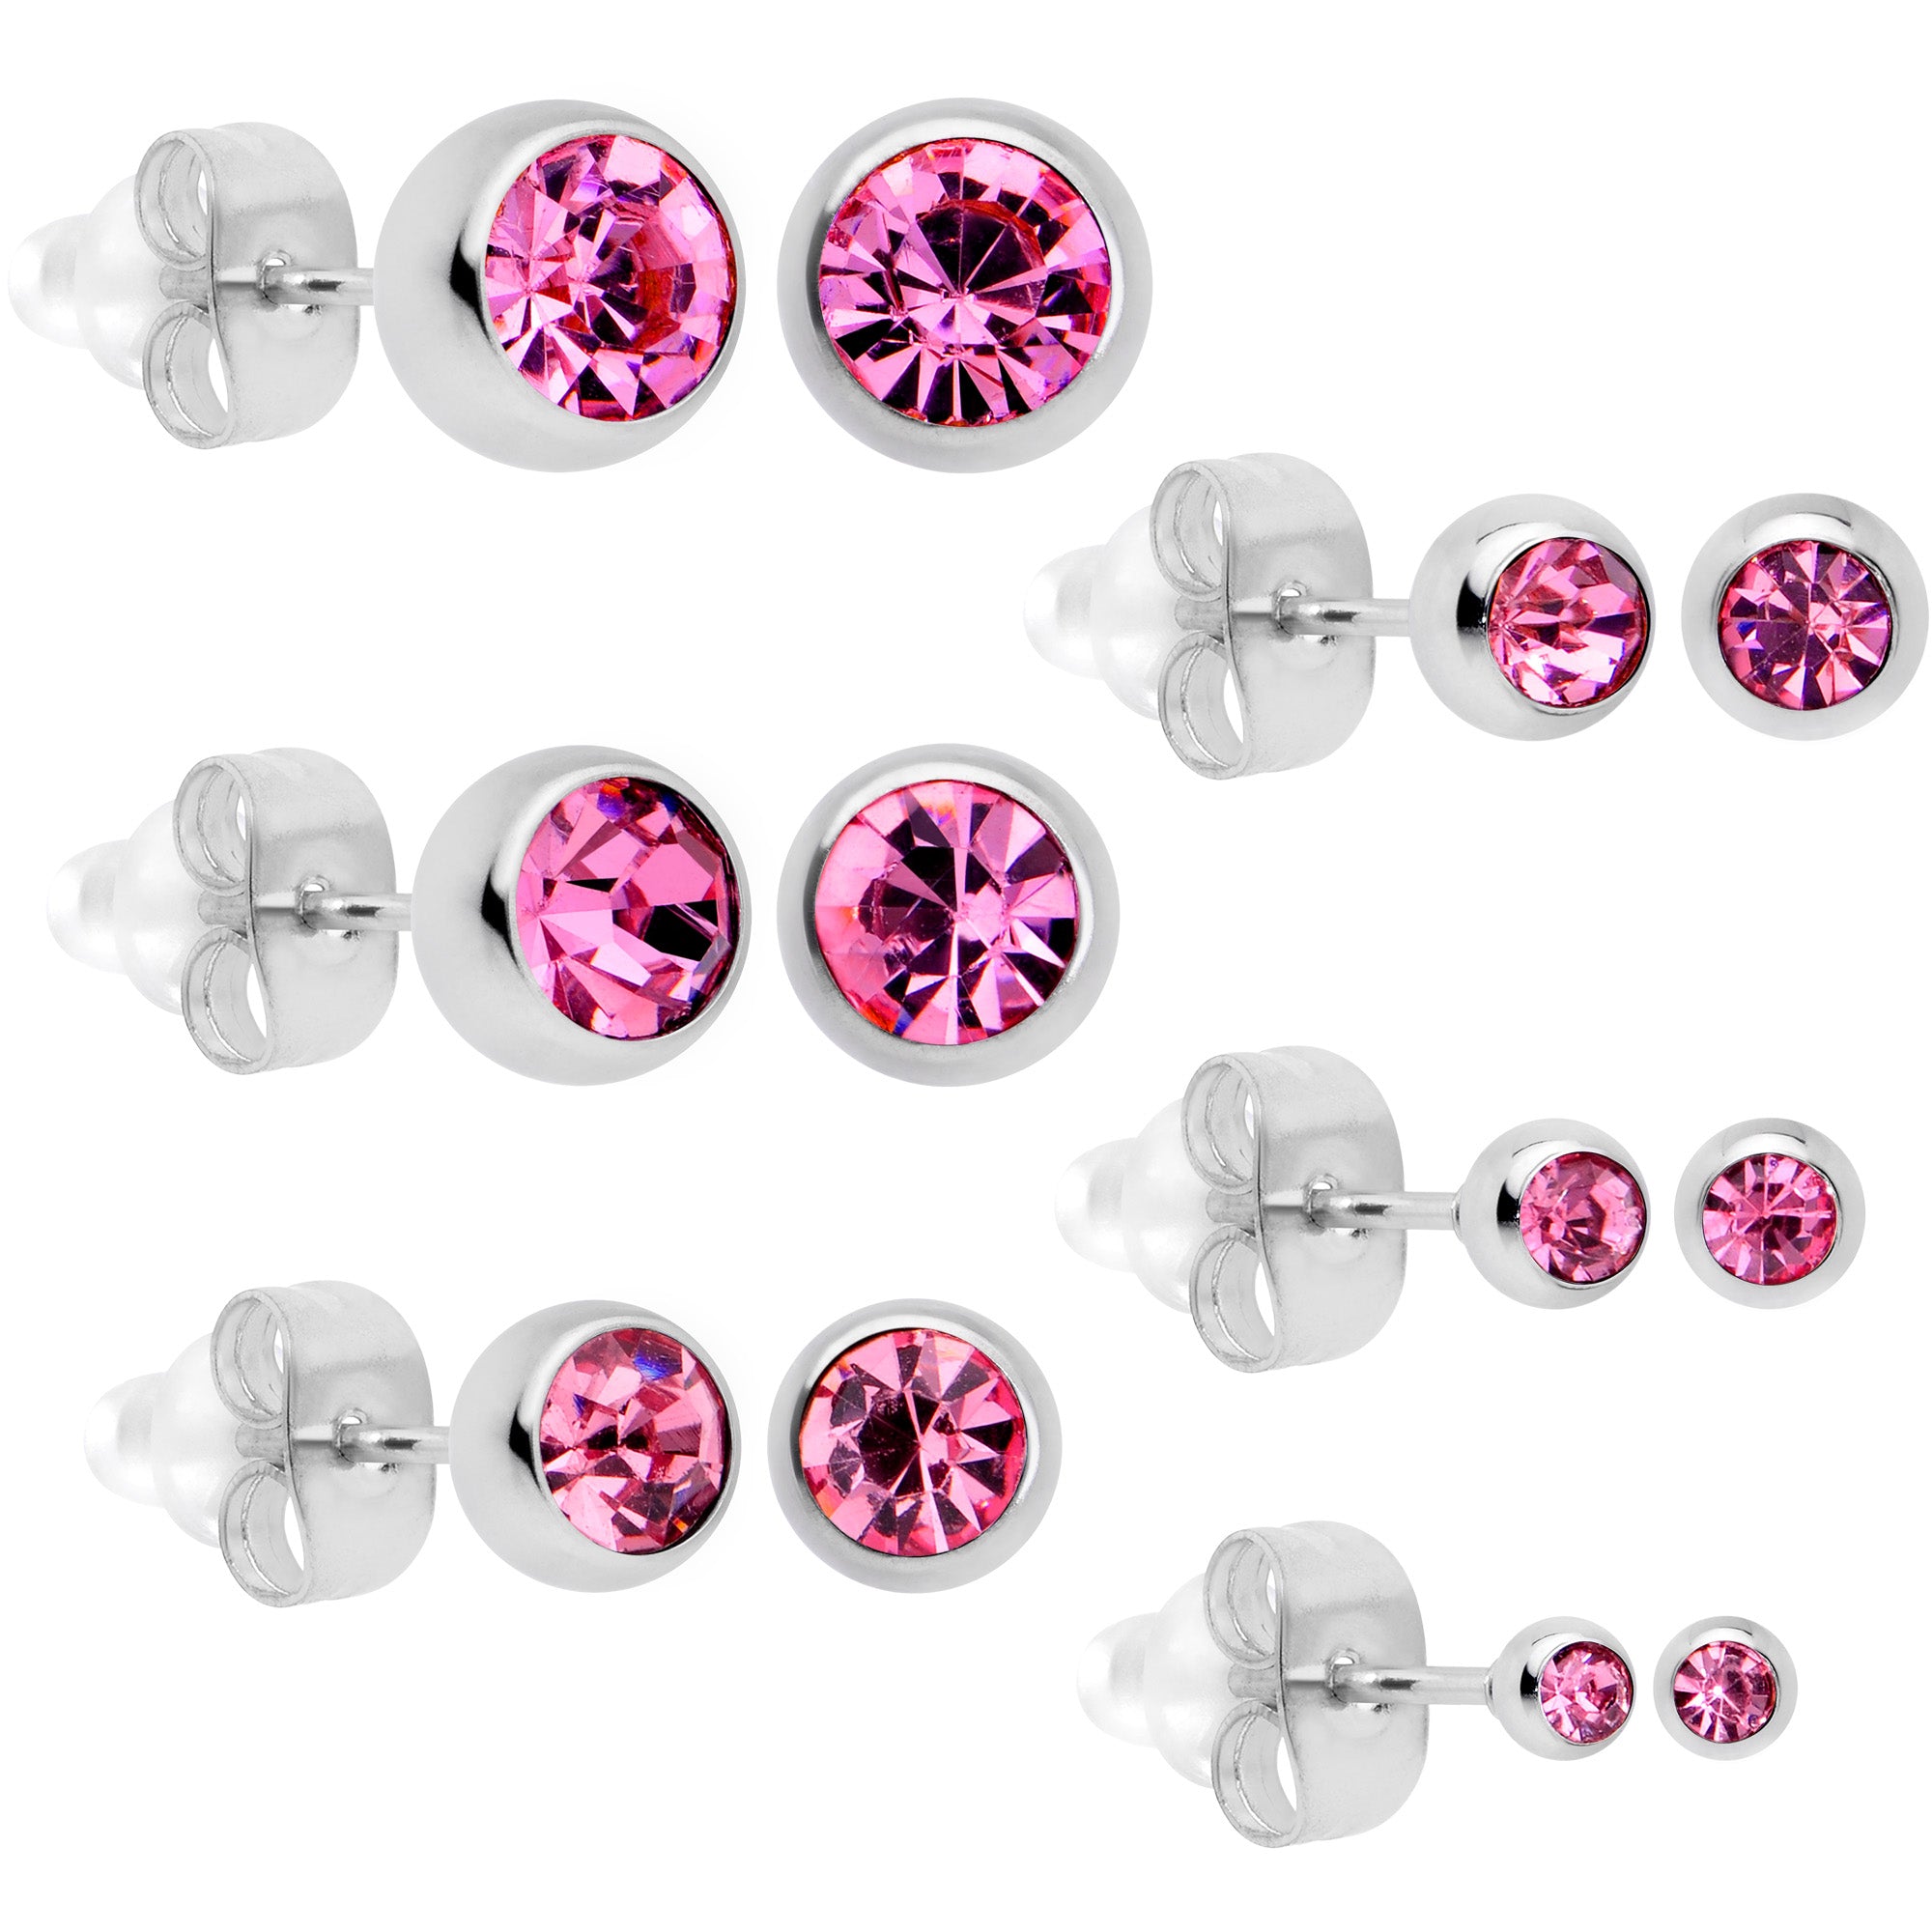 Pink Gem 3mm to 8mm Ball End Stud Earrings Set of 6